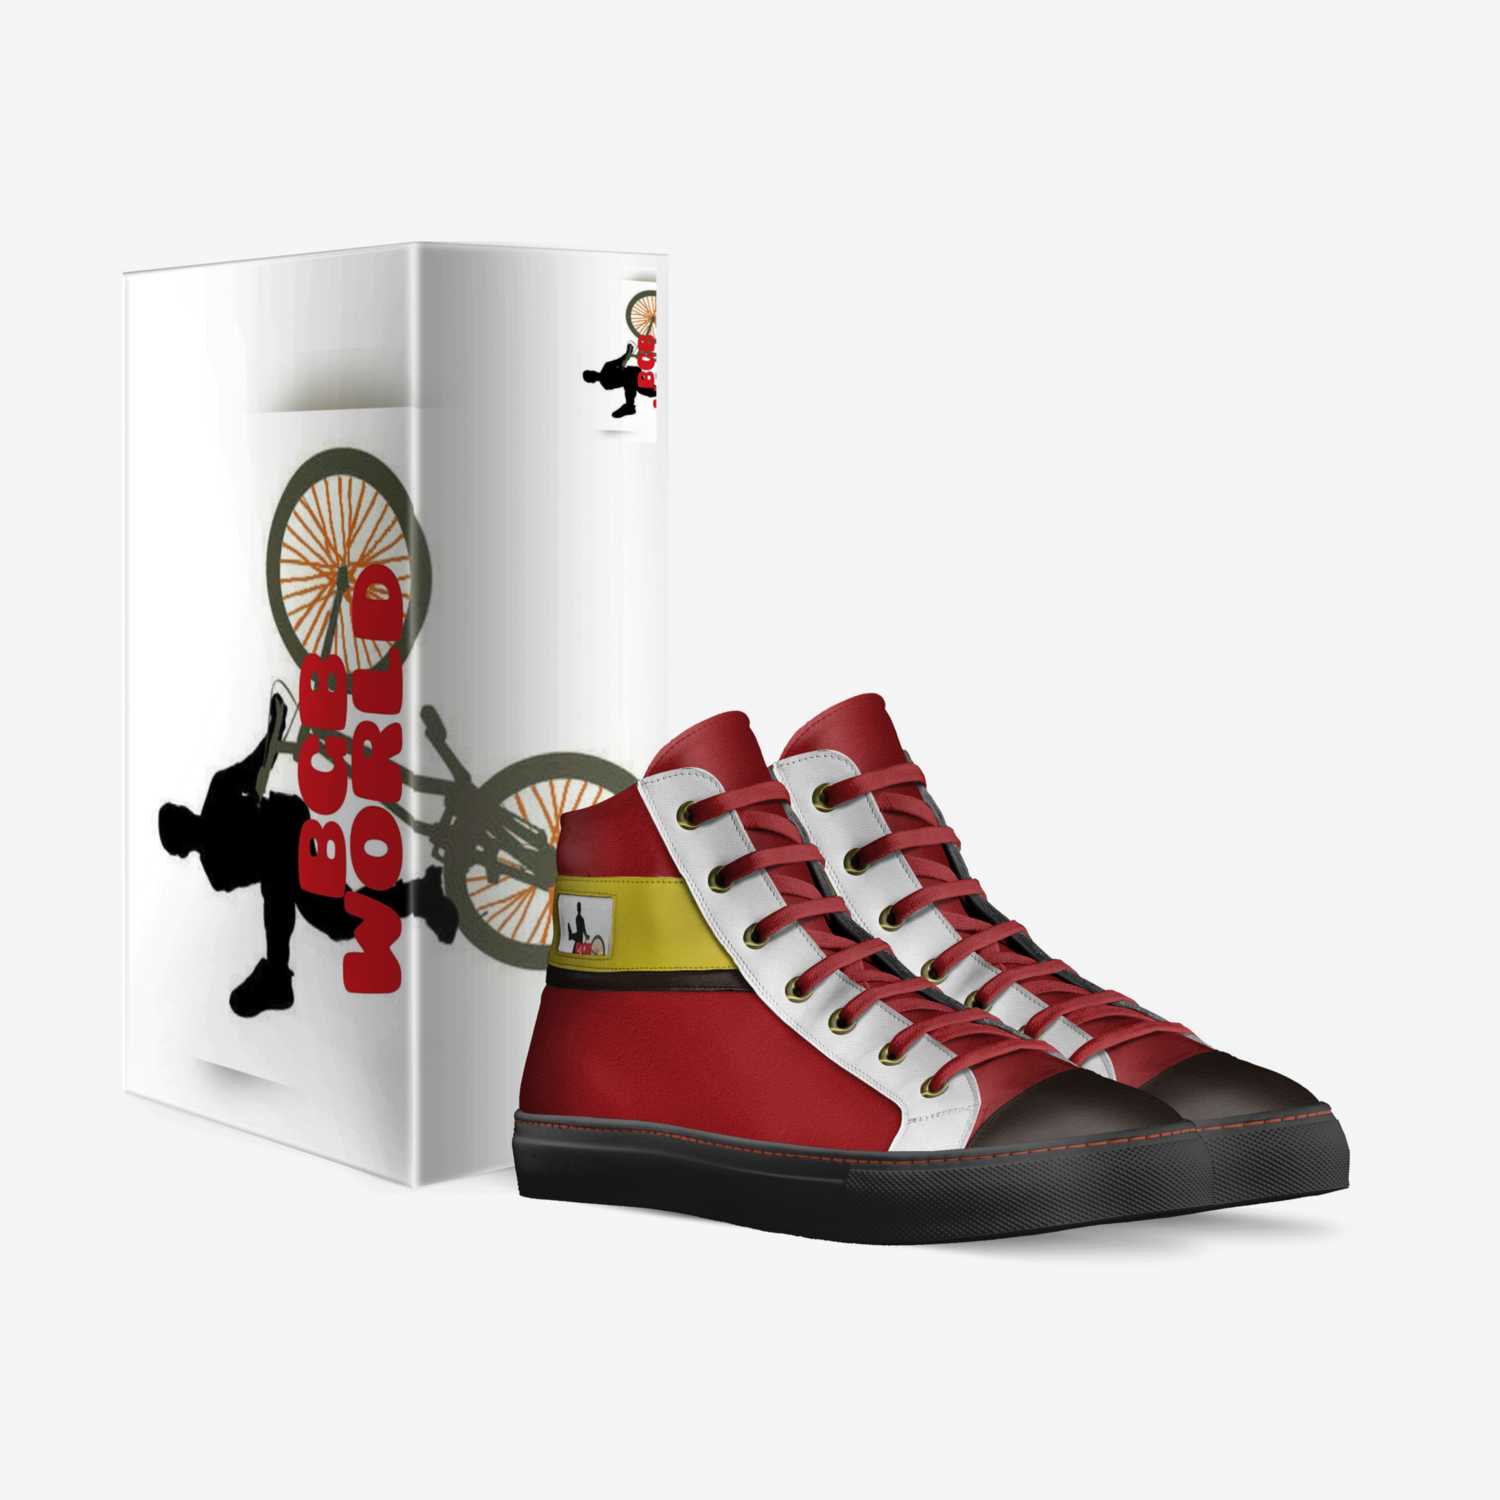 Da miracle walker custom made in Italy shoes by Rashien Gibson | Box view